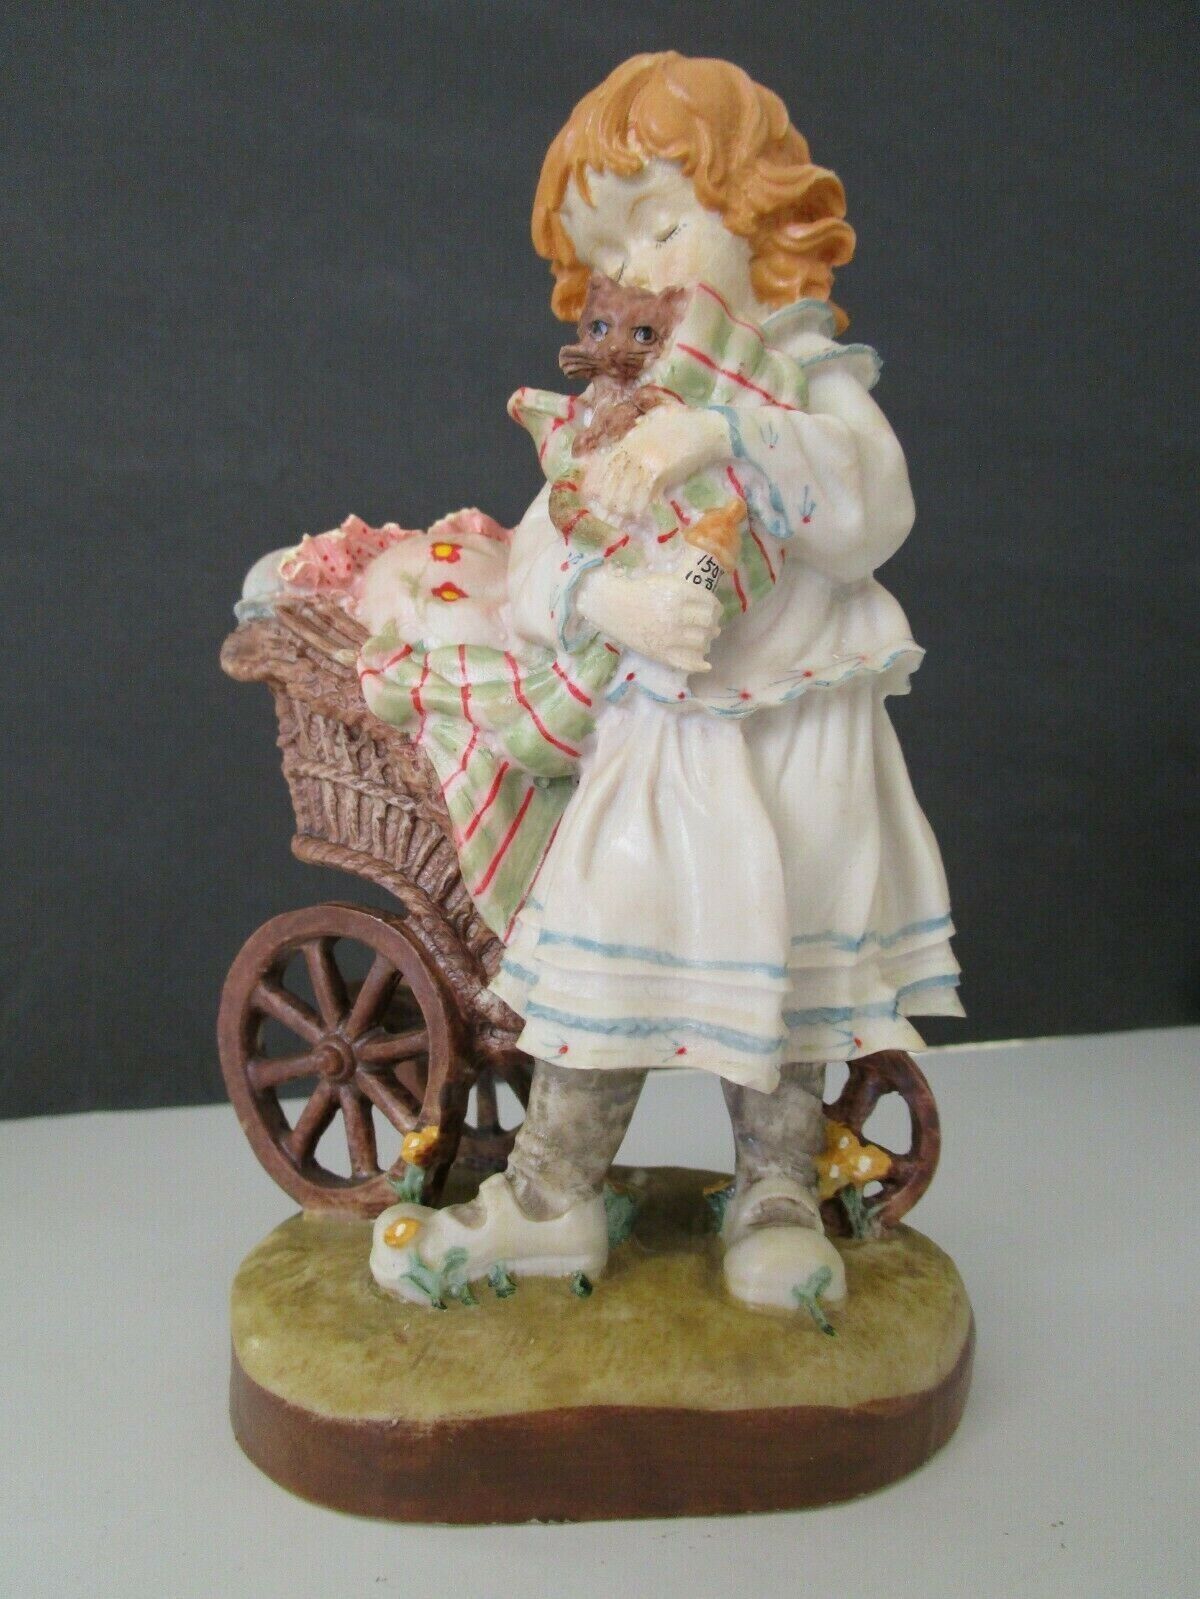 DOLFI ORIGINAL LISI MARTIN Figurine Hand Painted Signed Made in Italy Vintage